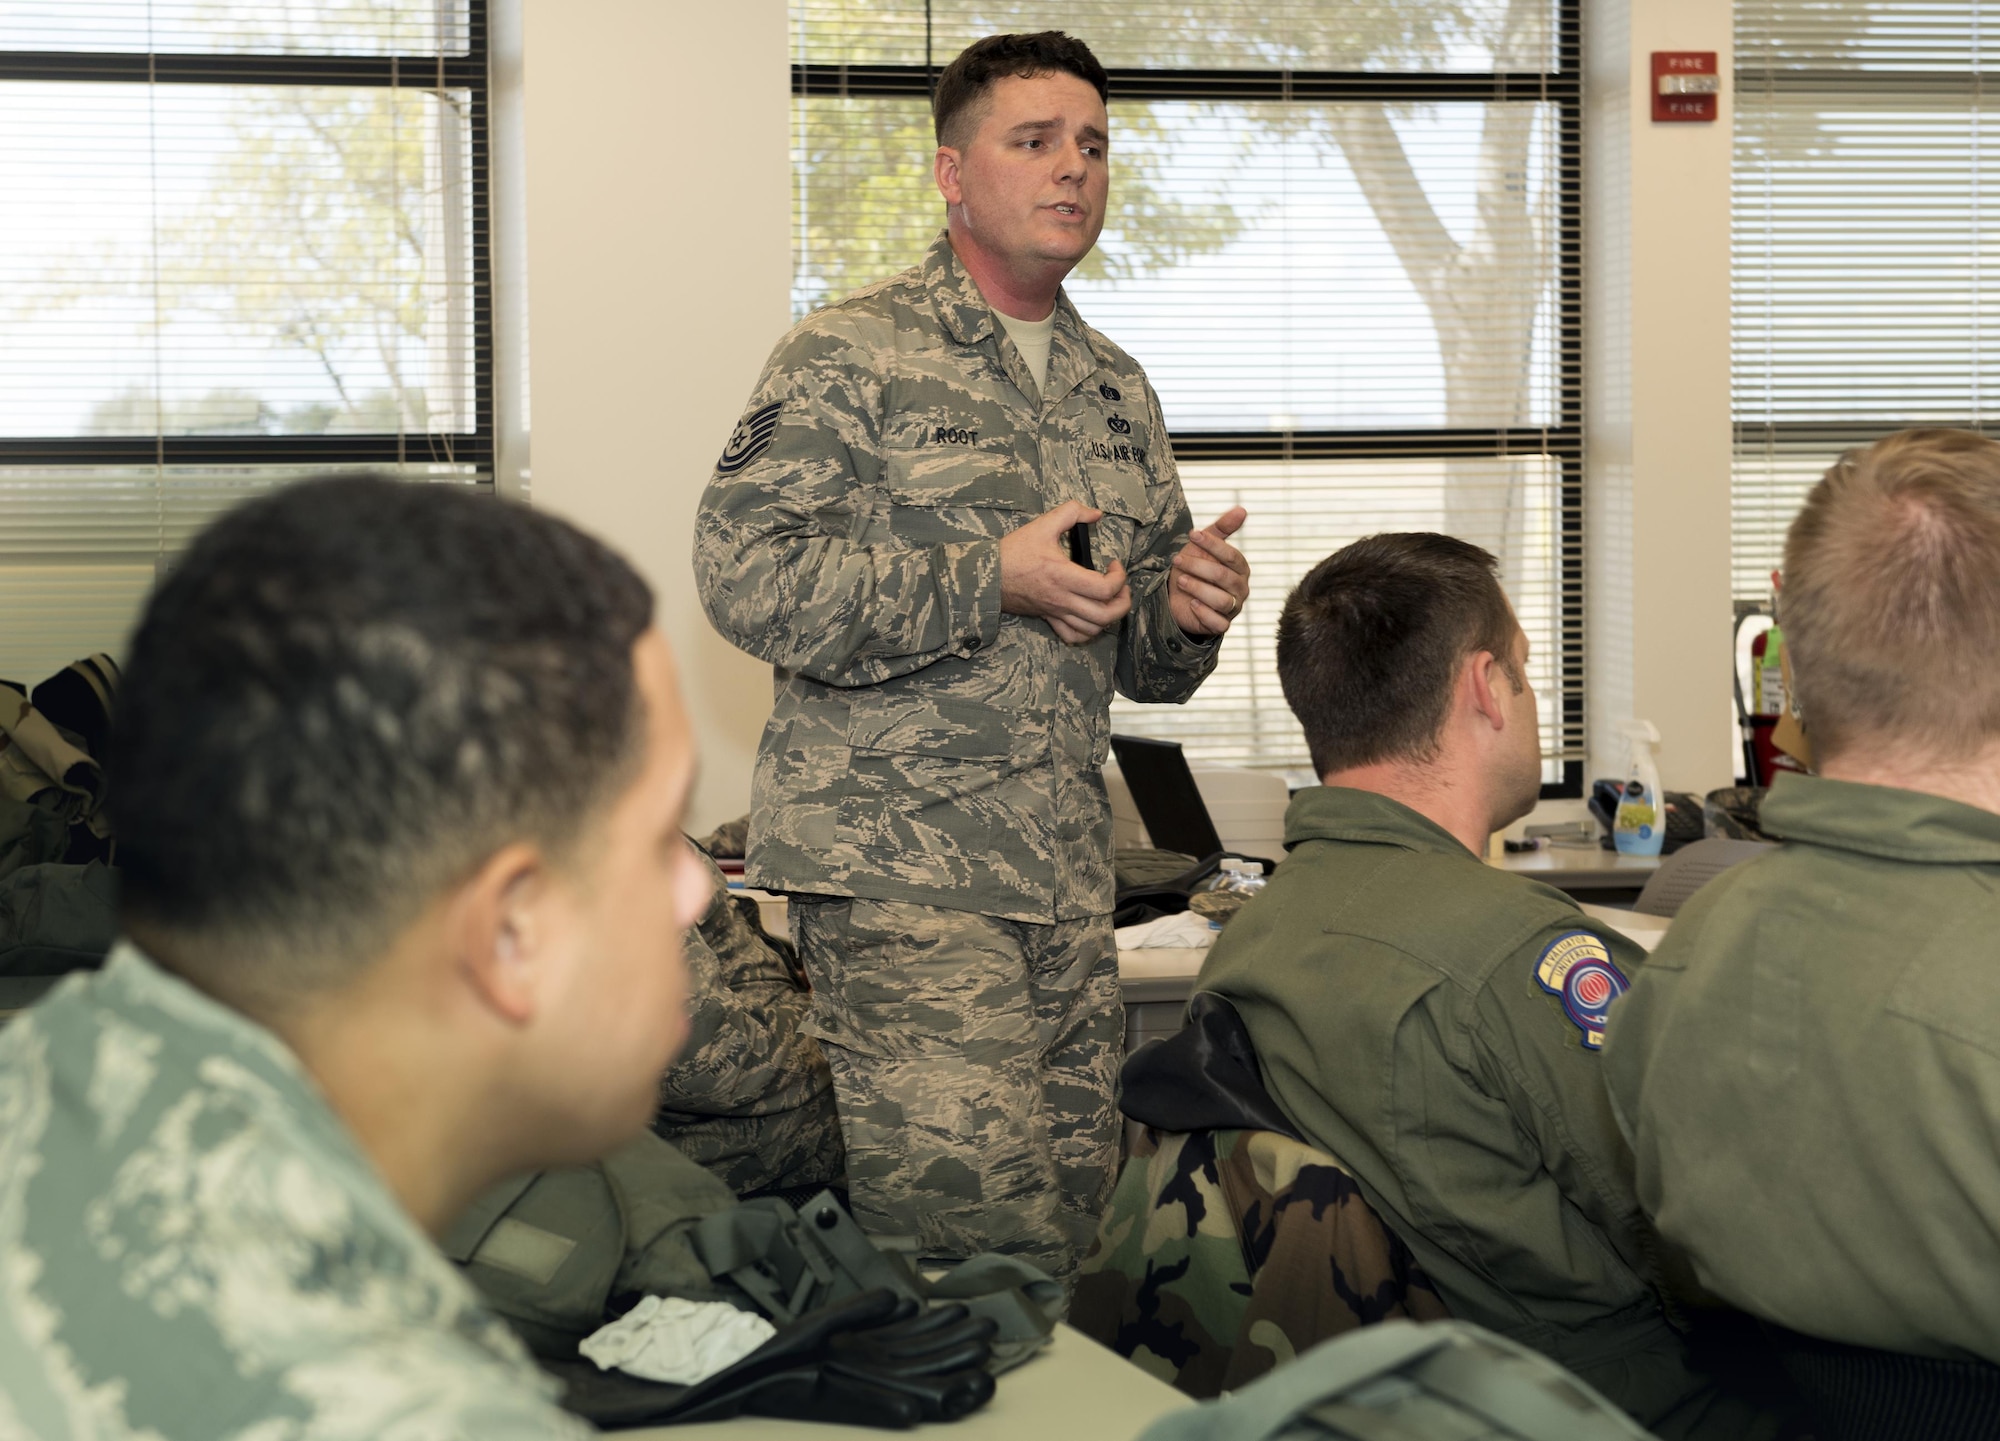 U. S. Air Force Airmen participate in a chemical, biological, radiological and nuclear defense survival skills training course taught by Tech Sgt. Donovan Root, 60th Civil Engineer Squadron on Travis Air Force Base, Calif., Sep. 21, 2017. The CBRN defense course consists of individual knowledge-based and demonstration performance objectives that provide an in-depth education on CBRN defense hazards and protective actions. (U.S. Air Force photo by Heide Couch)